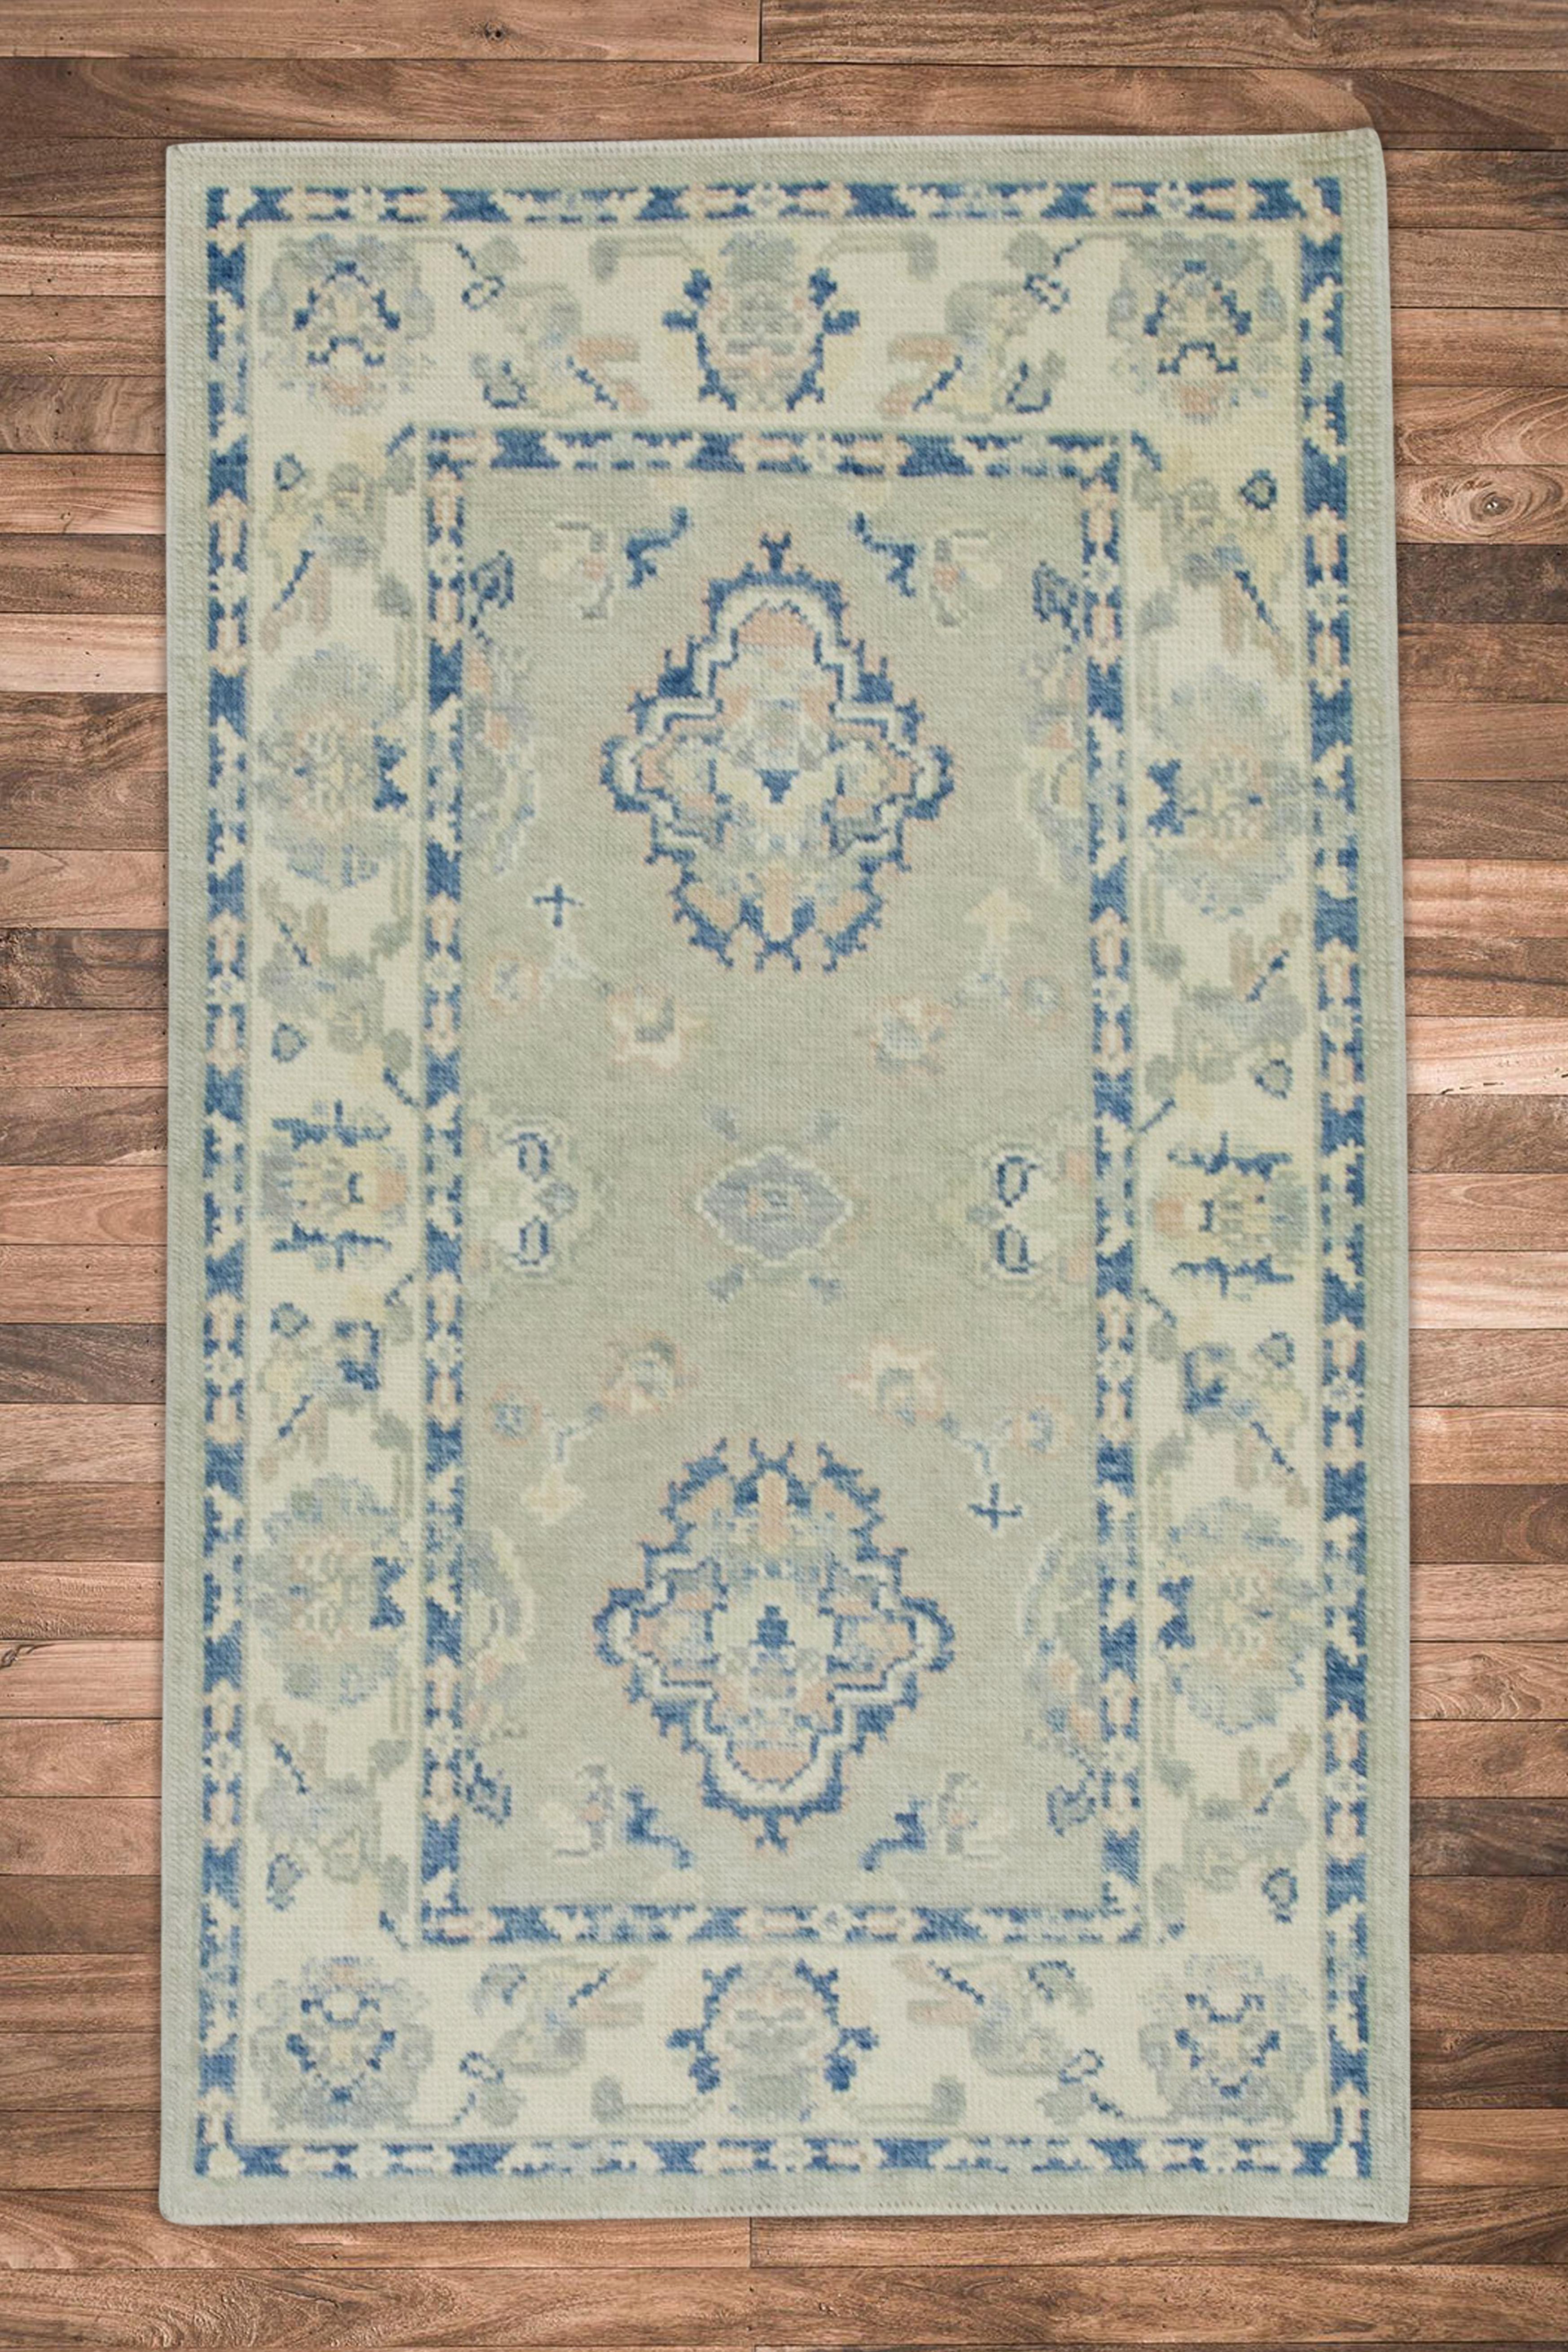 Contemporary Green & Blue Floral Design Handwoven Wool Turkish Oushak Rug 3' x 4'10